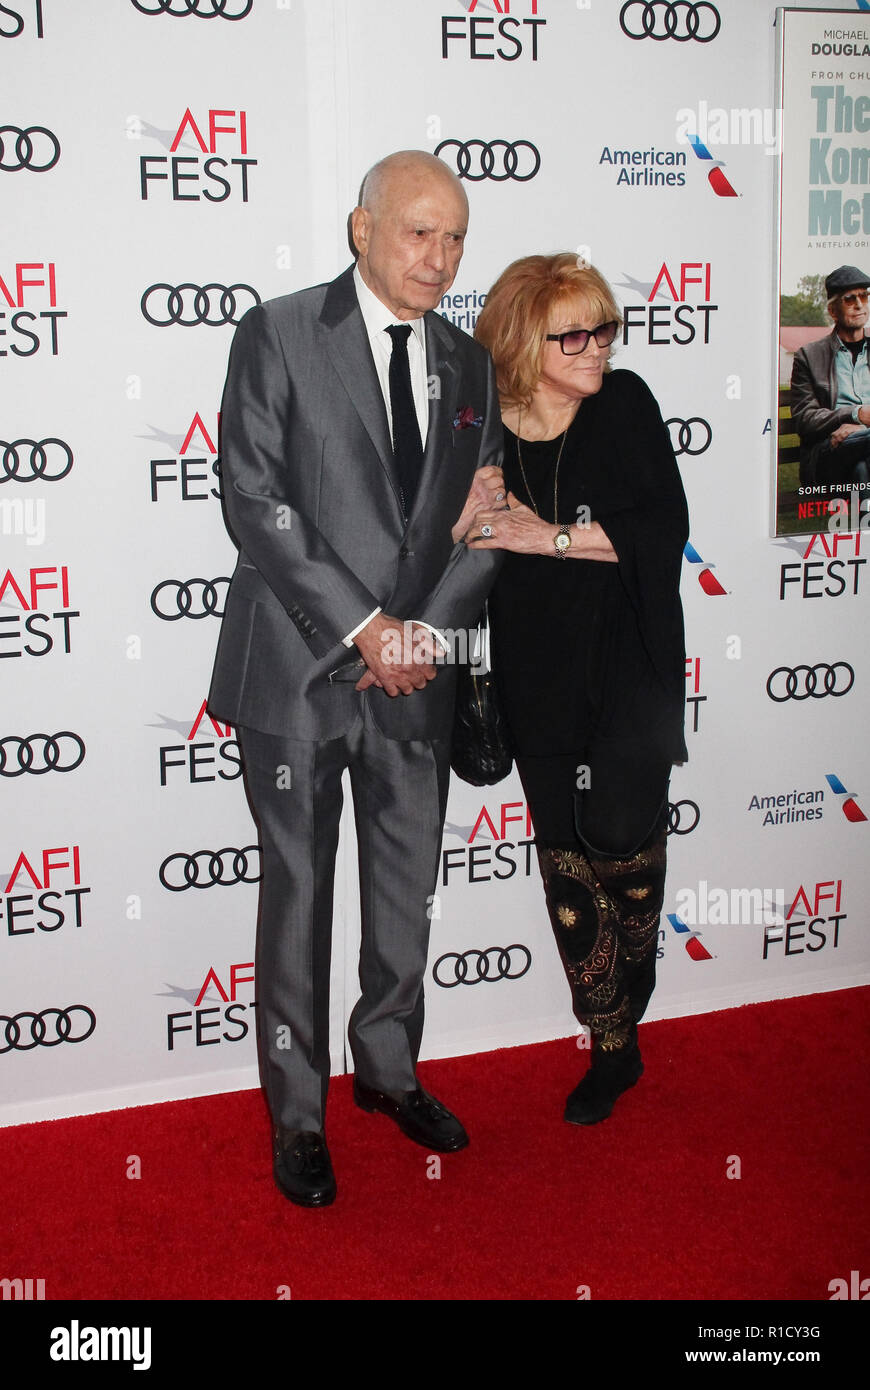 Alan Arkin, Ann-Margret  11/10/2018 AFI Fest 2018 World Premiere Gala Screening of 'The Kominsky Method' held at TCL Chinese Theatre in Hollywood, CA Photo by Hiro Katoh / HNW / PictureLux Stock Photo